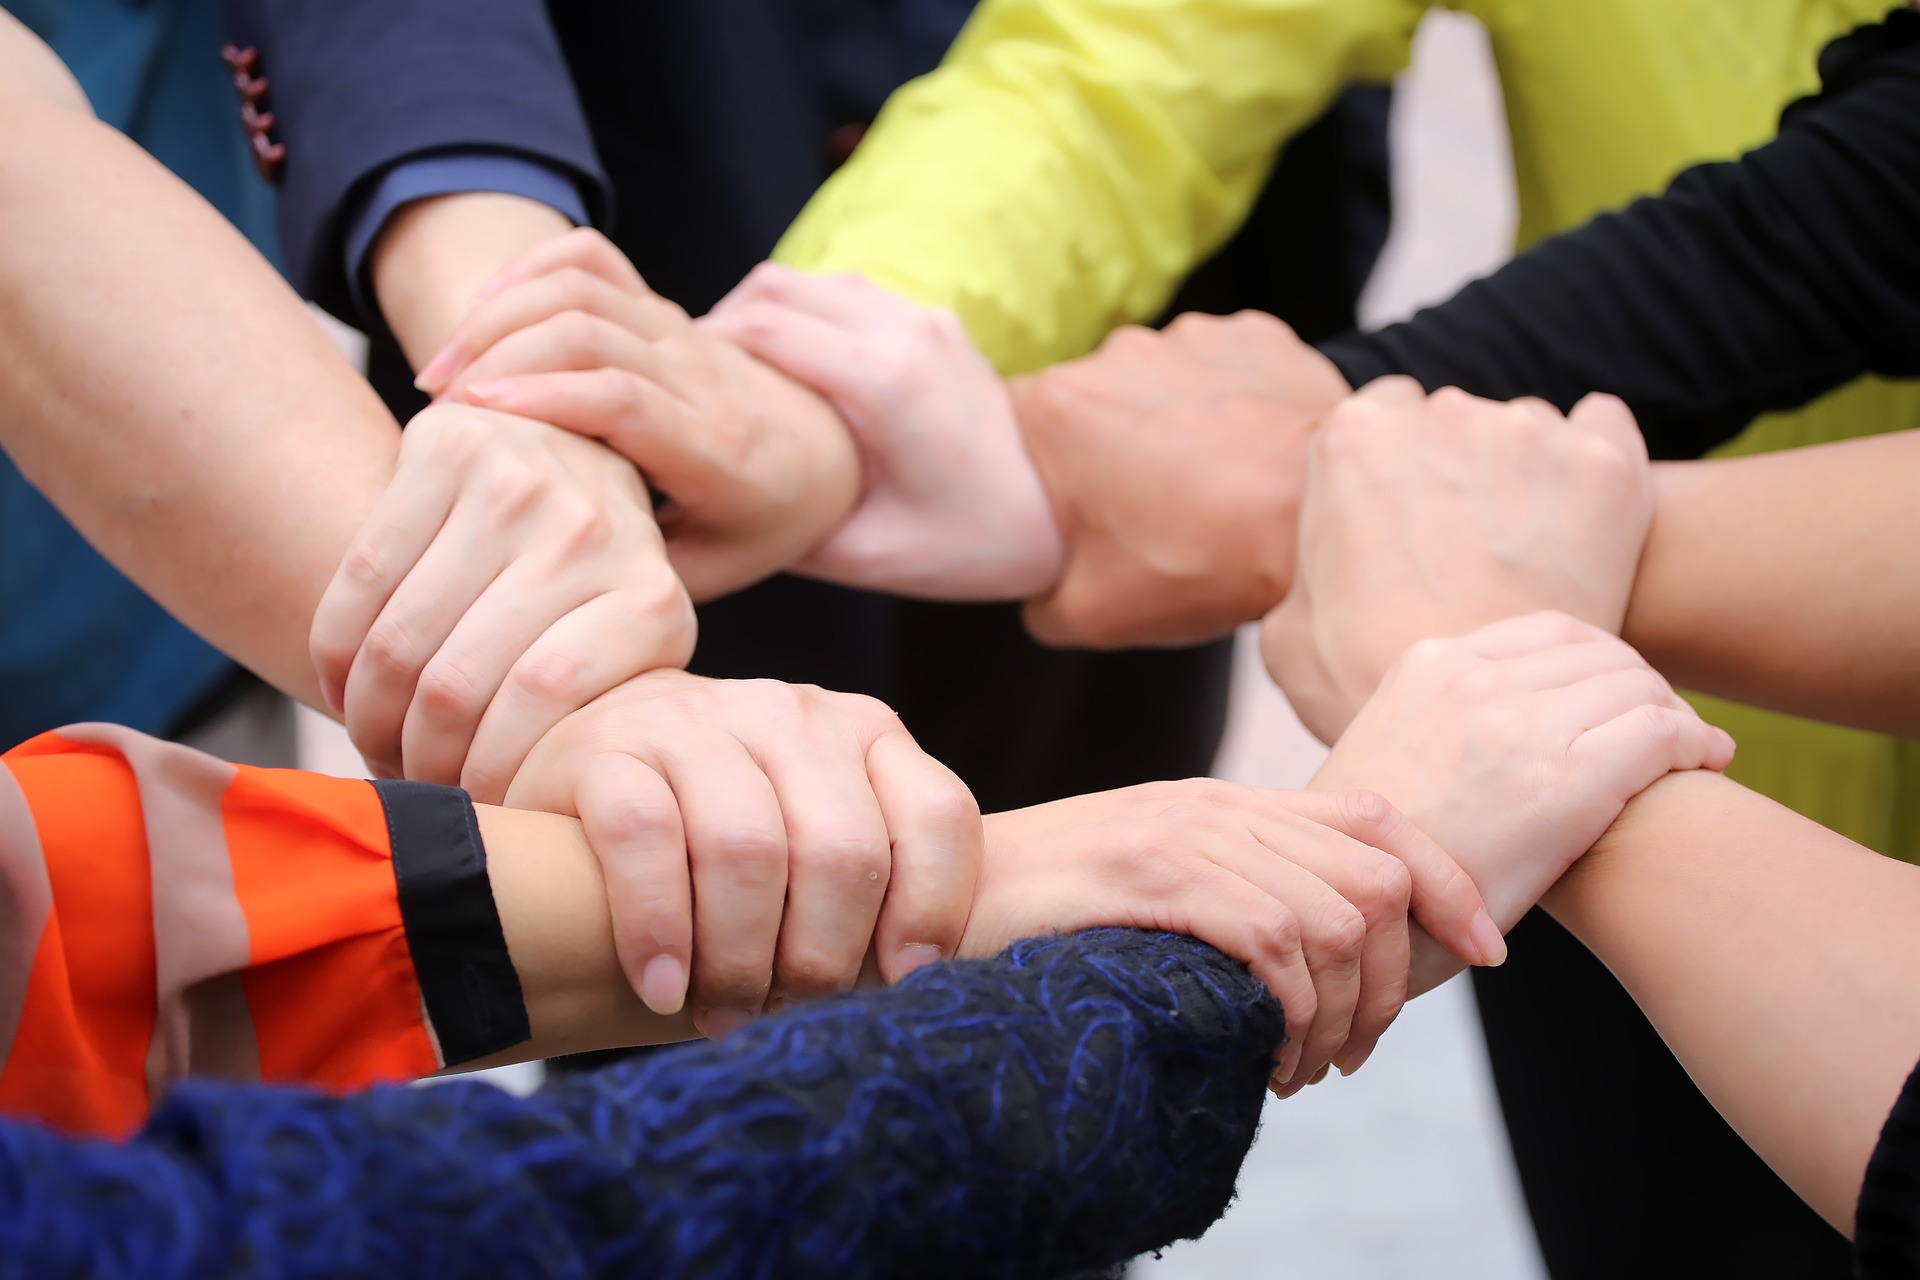 Group of hands holding on to each other to show unity